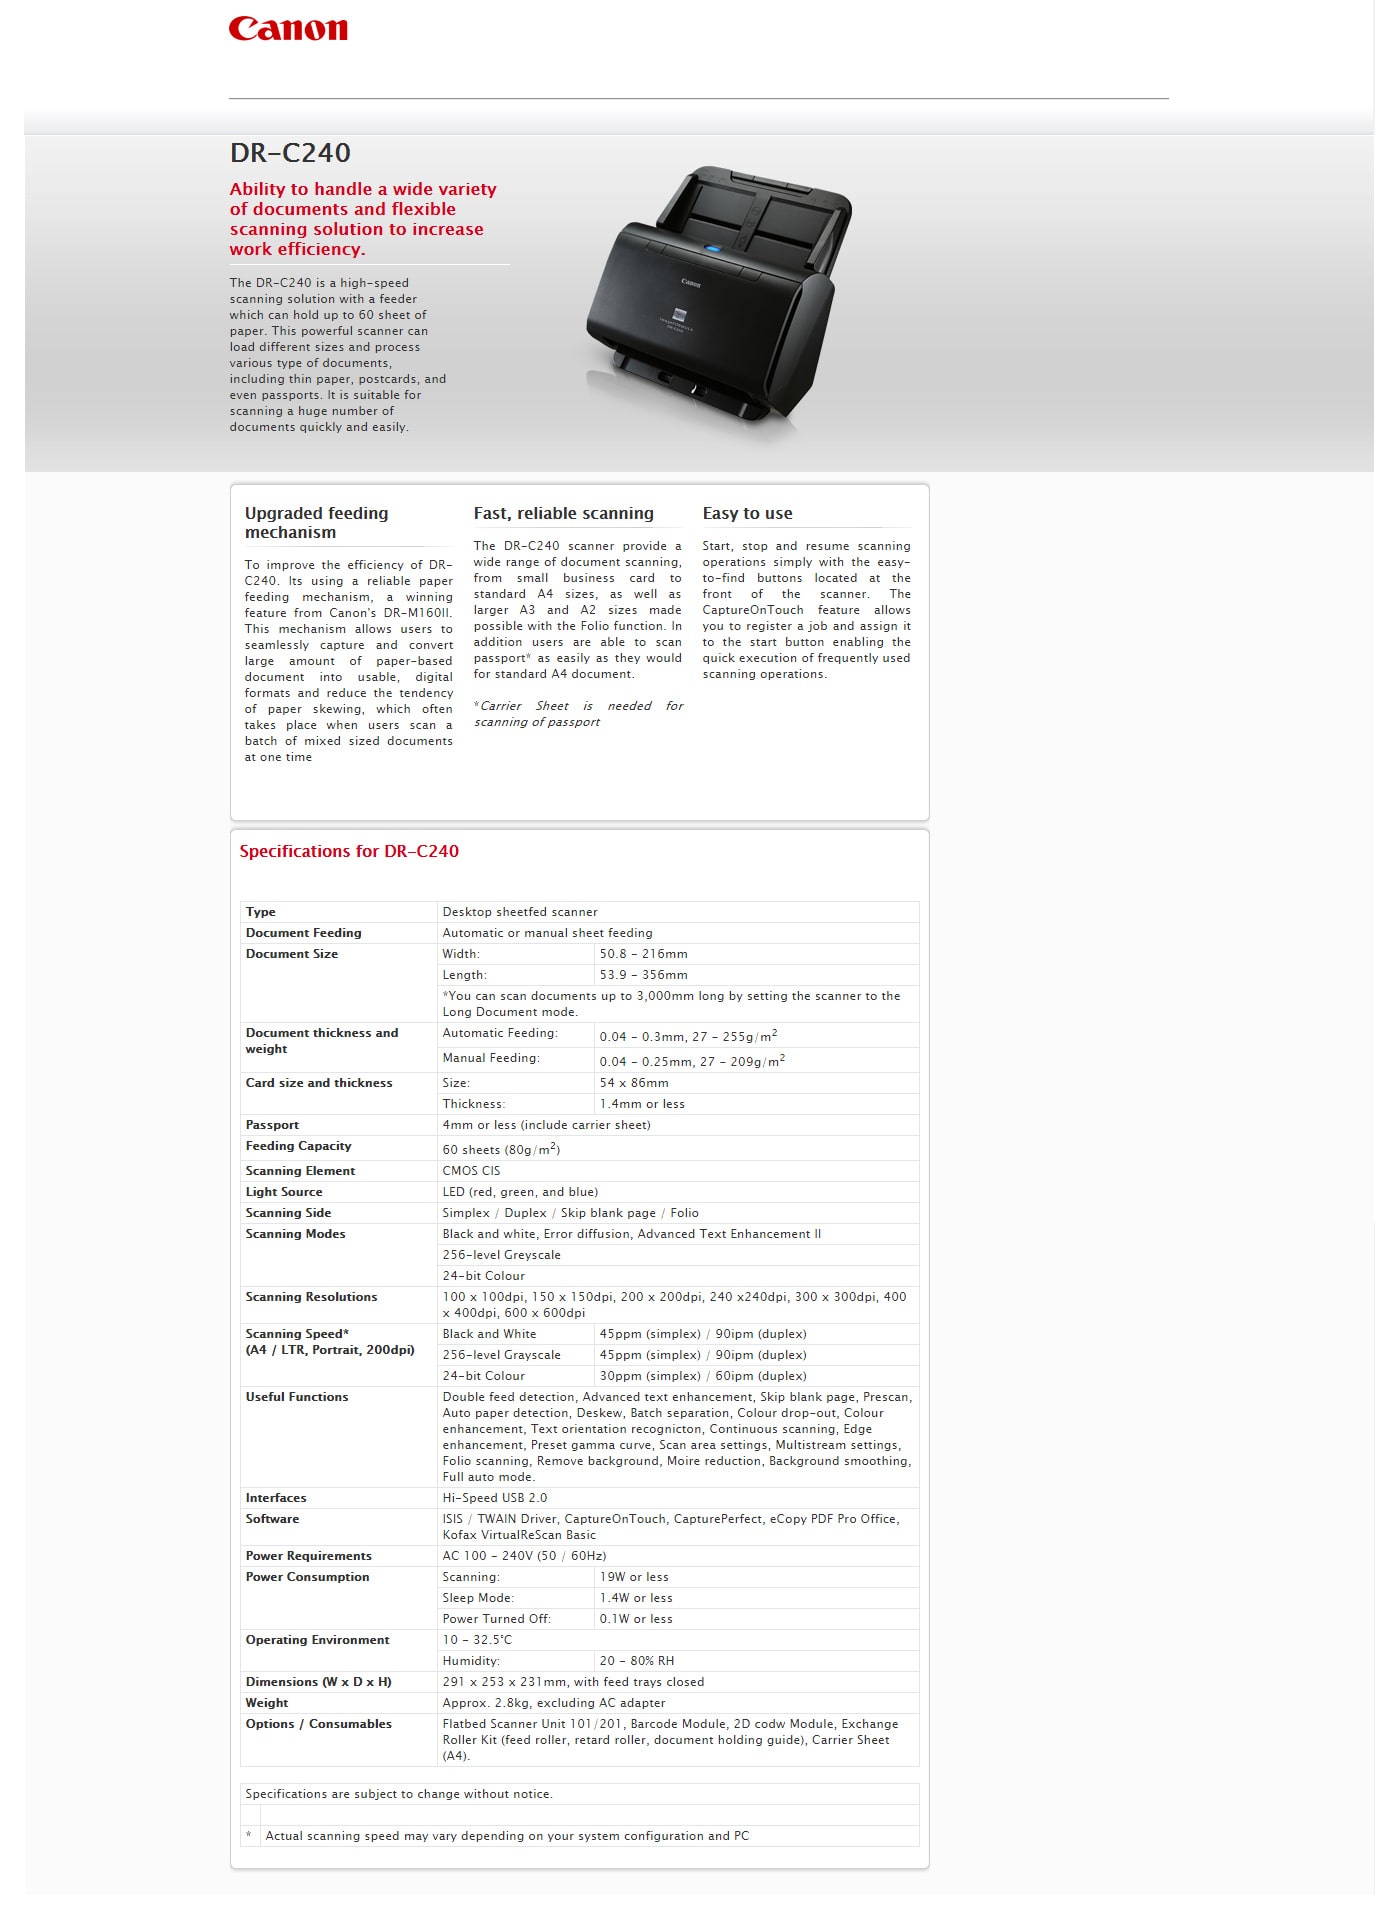 Canon DR-C240 Document Scanner features